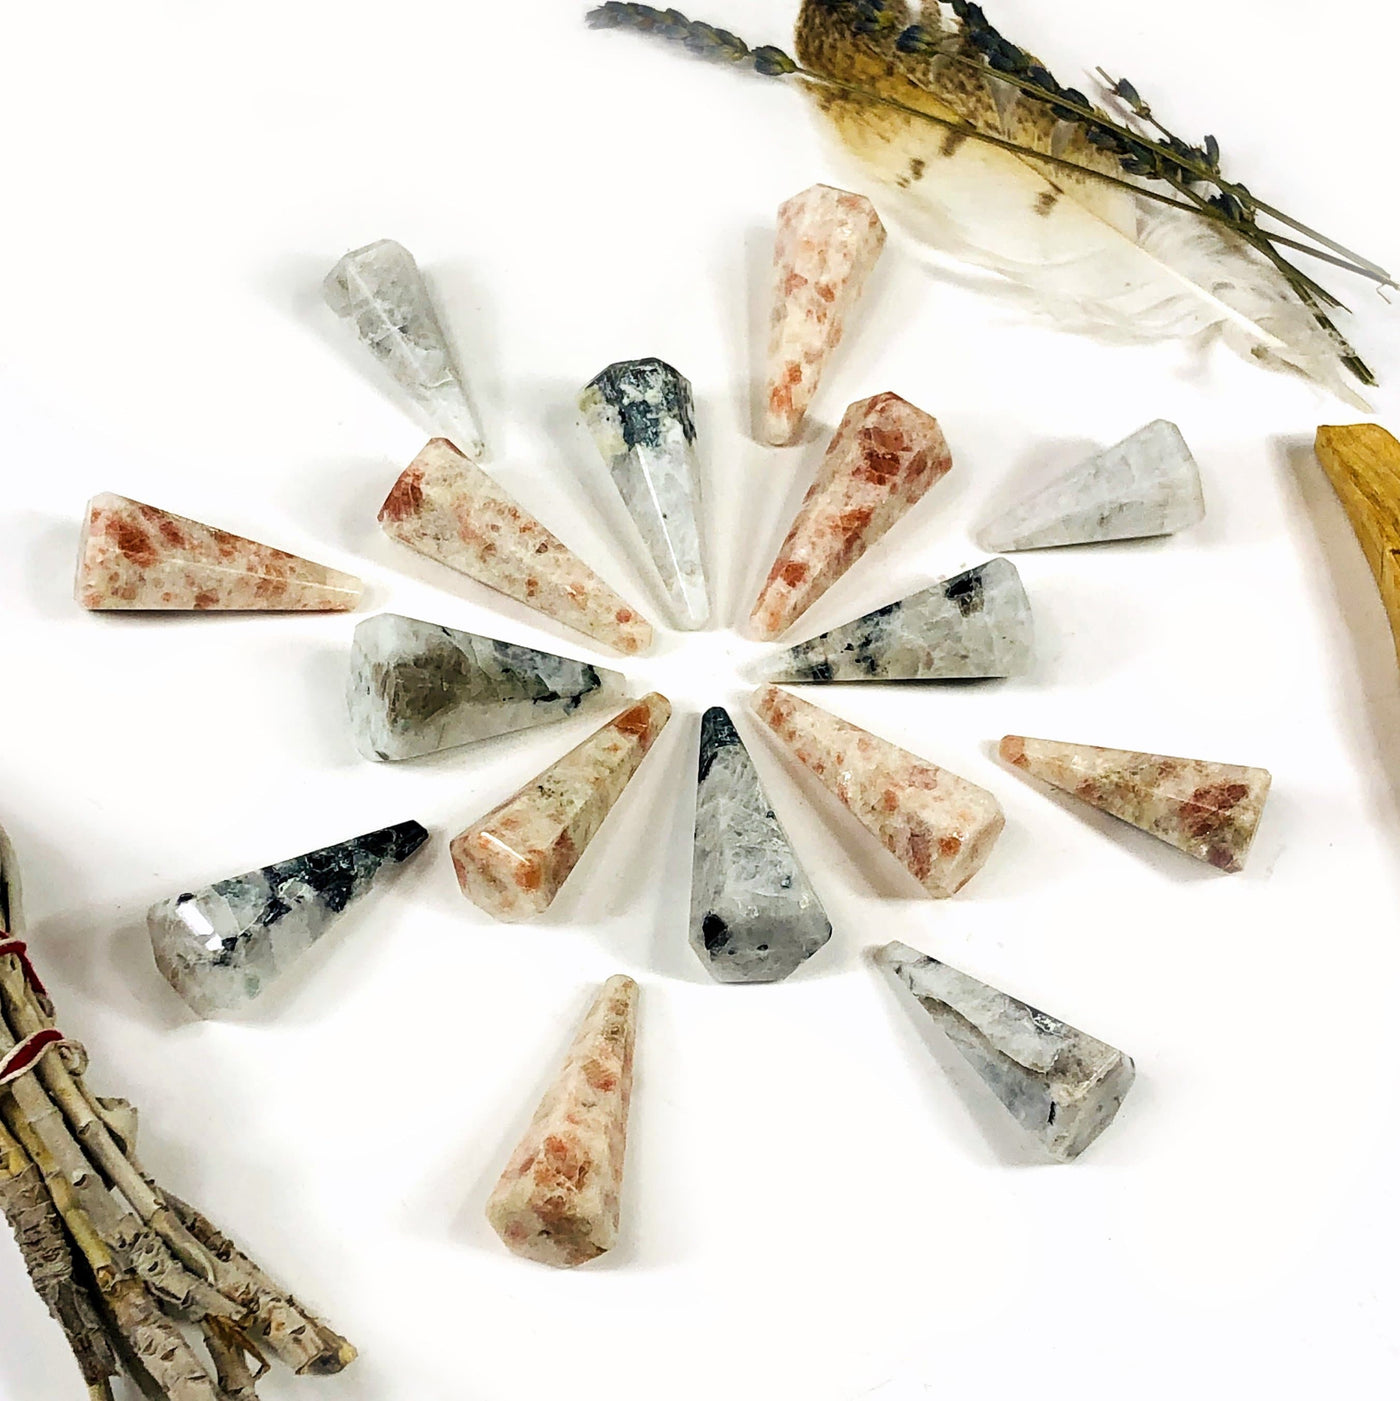 sunstone and moonstone pendulum points on white background with decorations